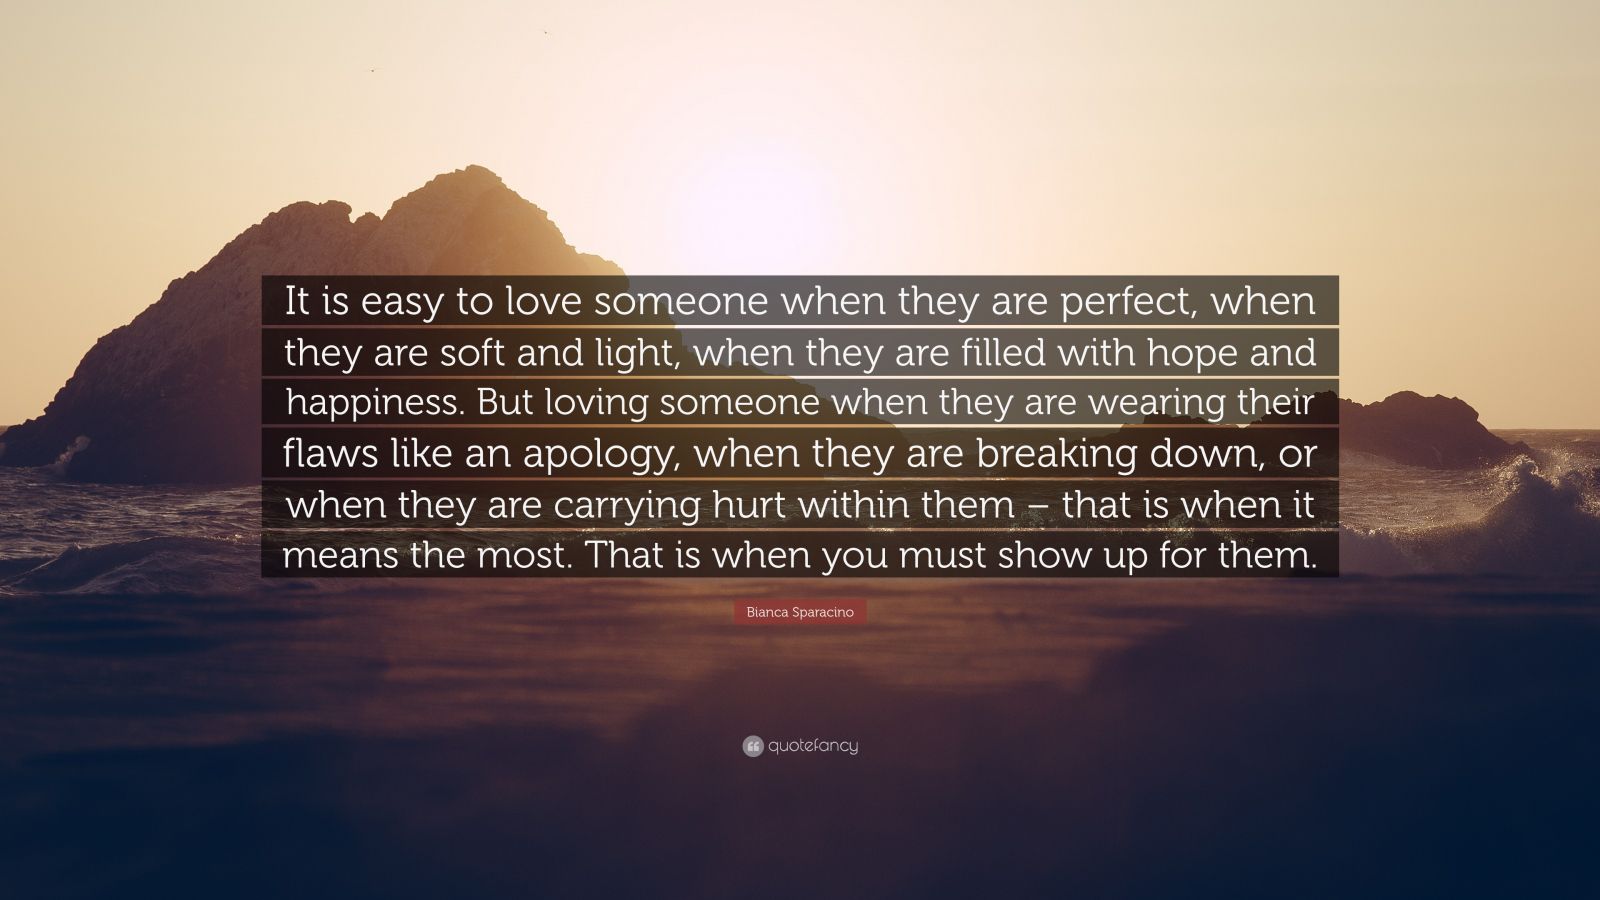 Bianca Sparacino Quote: “It is easy to love someone when they are ...